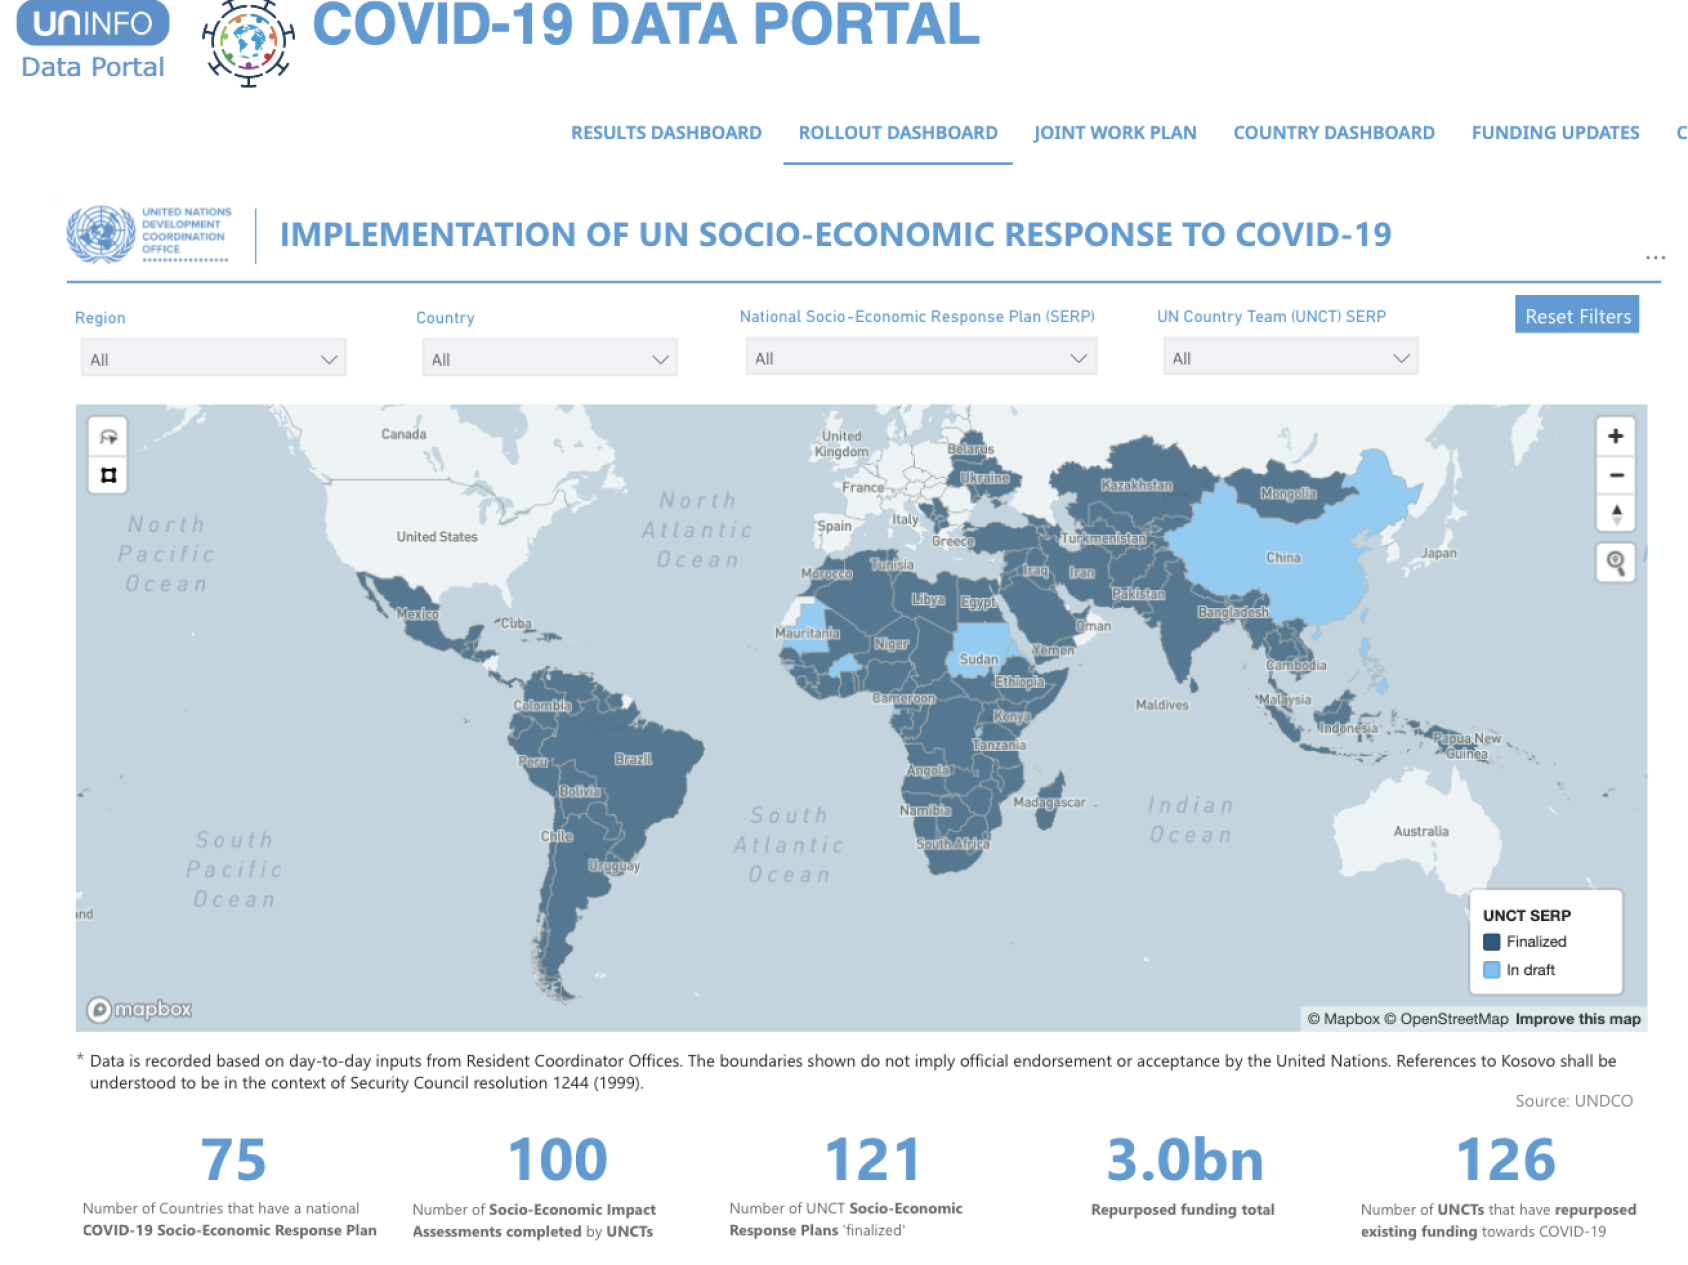 A screen capture of the COVID-19 Data Portal showing a global heat map of the socio-economic response.